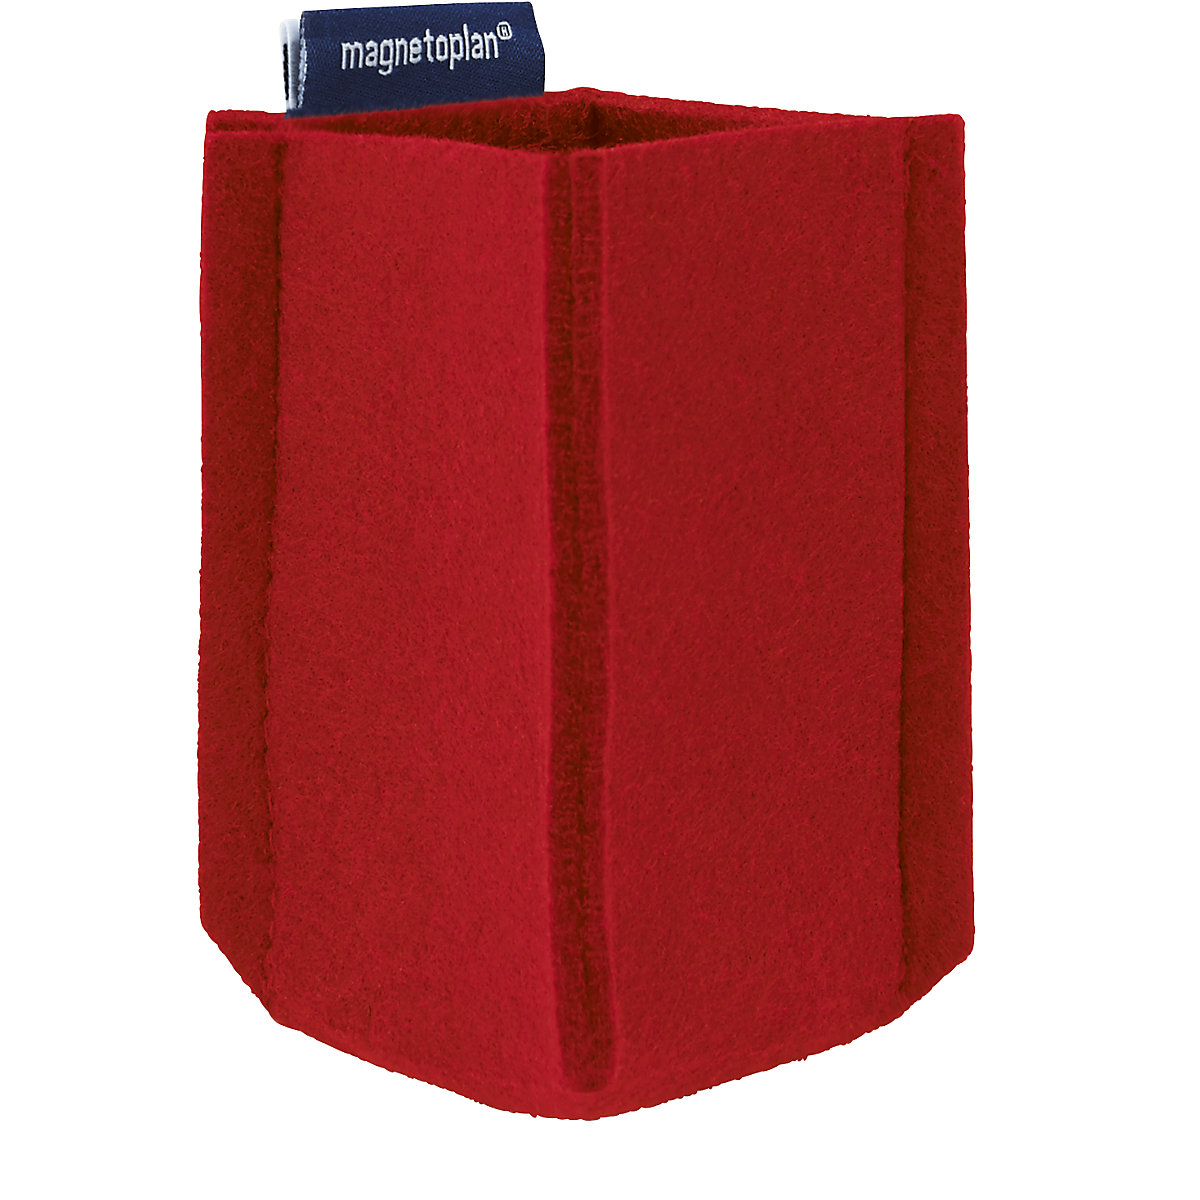 magnetoTray pencil pot – magnetoplan, SMALL, HxWxD 100 x 60 x 60 mm, red, 5+ items-5